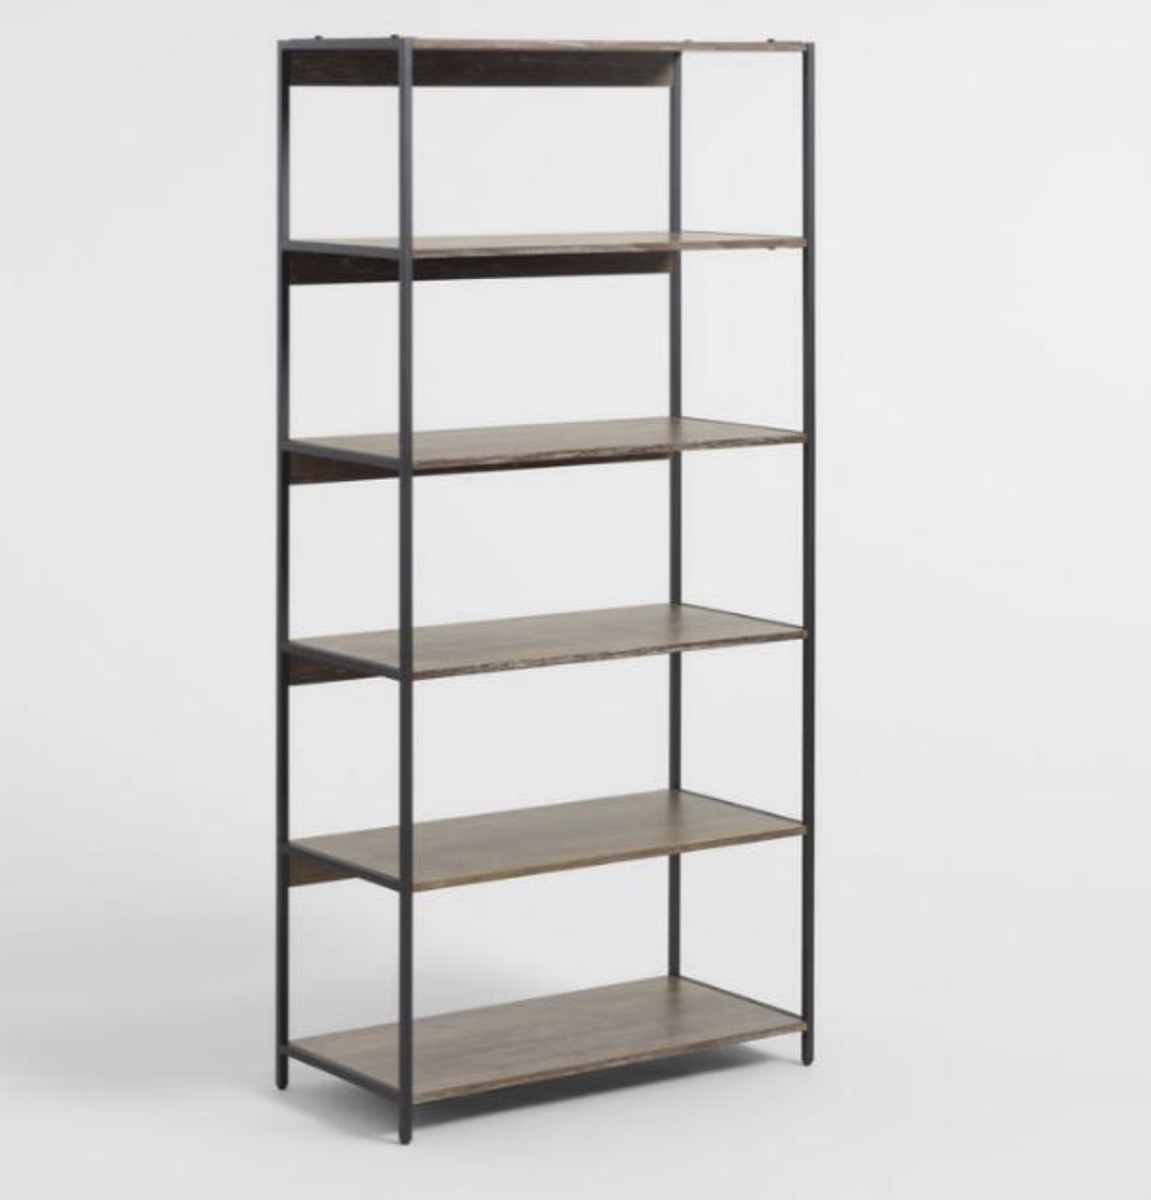 black bookcase with wooden shelves from World Market